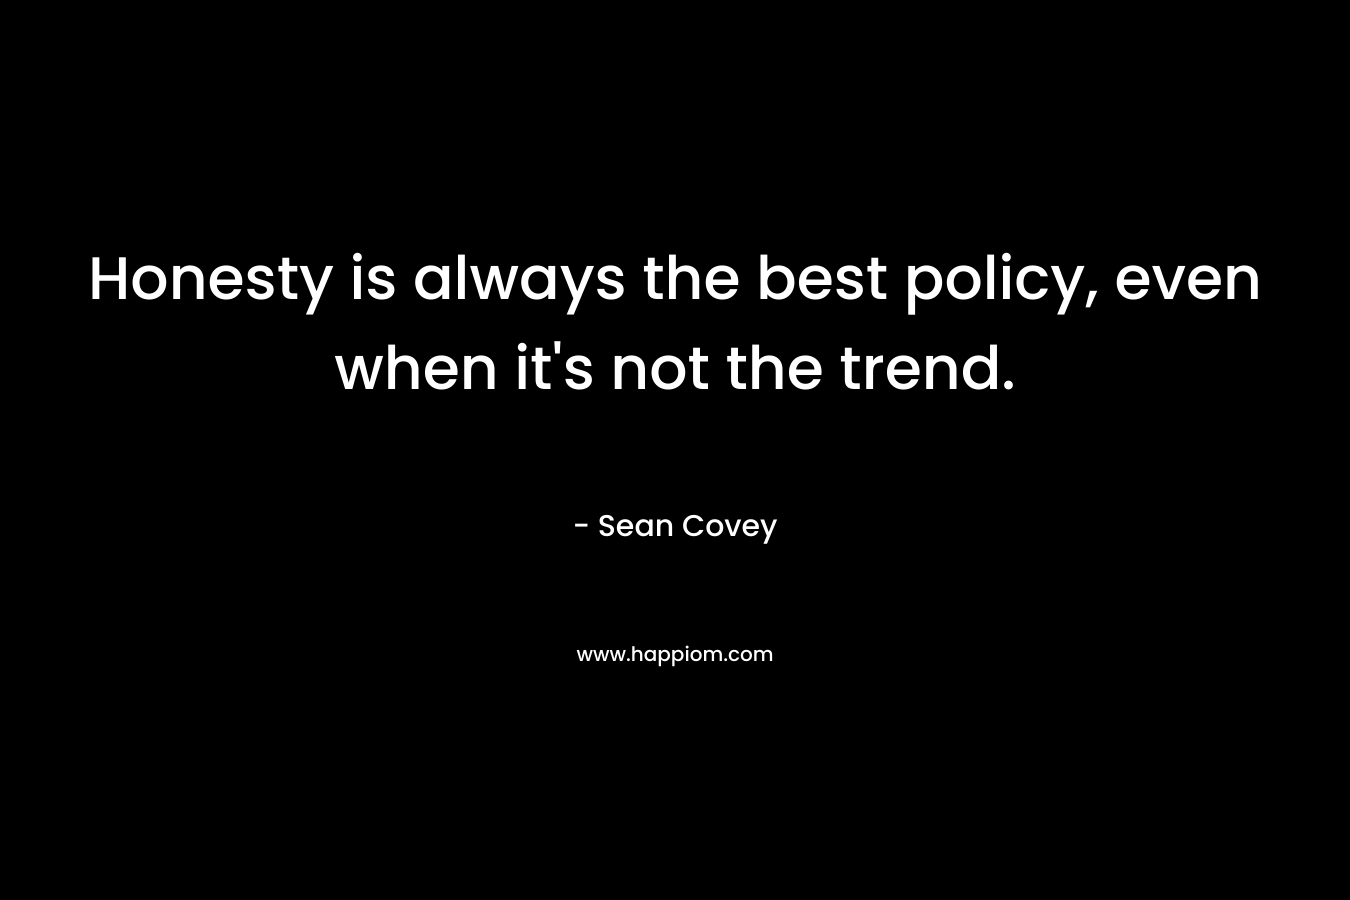 Honesty is always the best policy, even when it’s not the trend. – Sean Covey